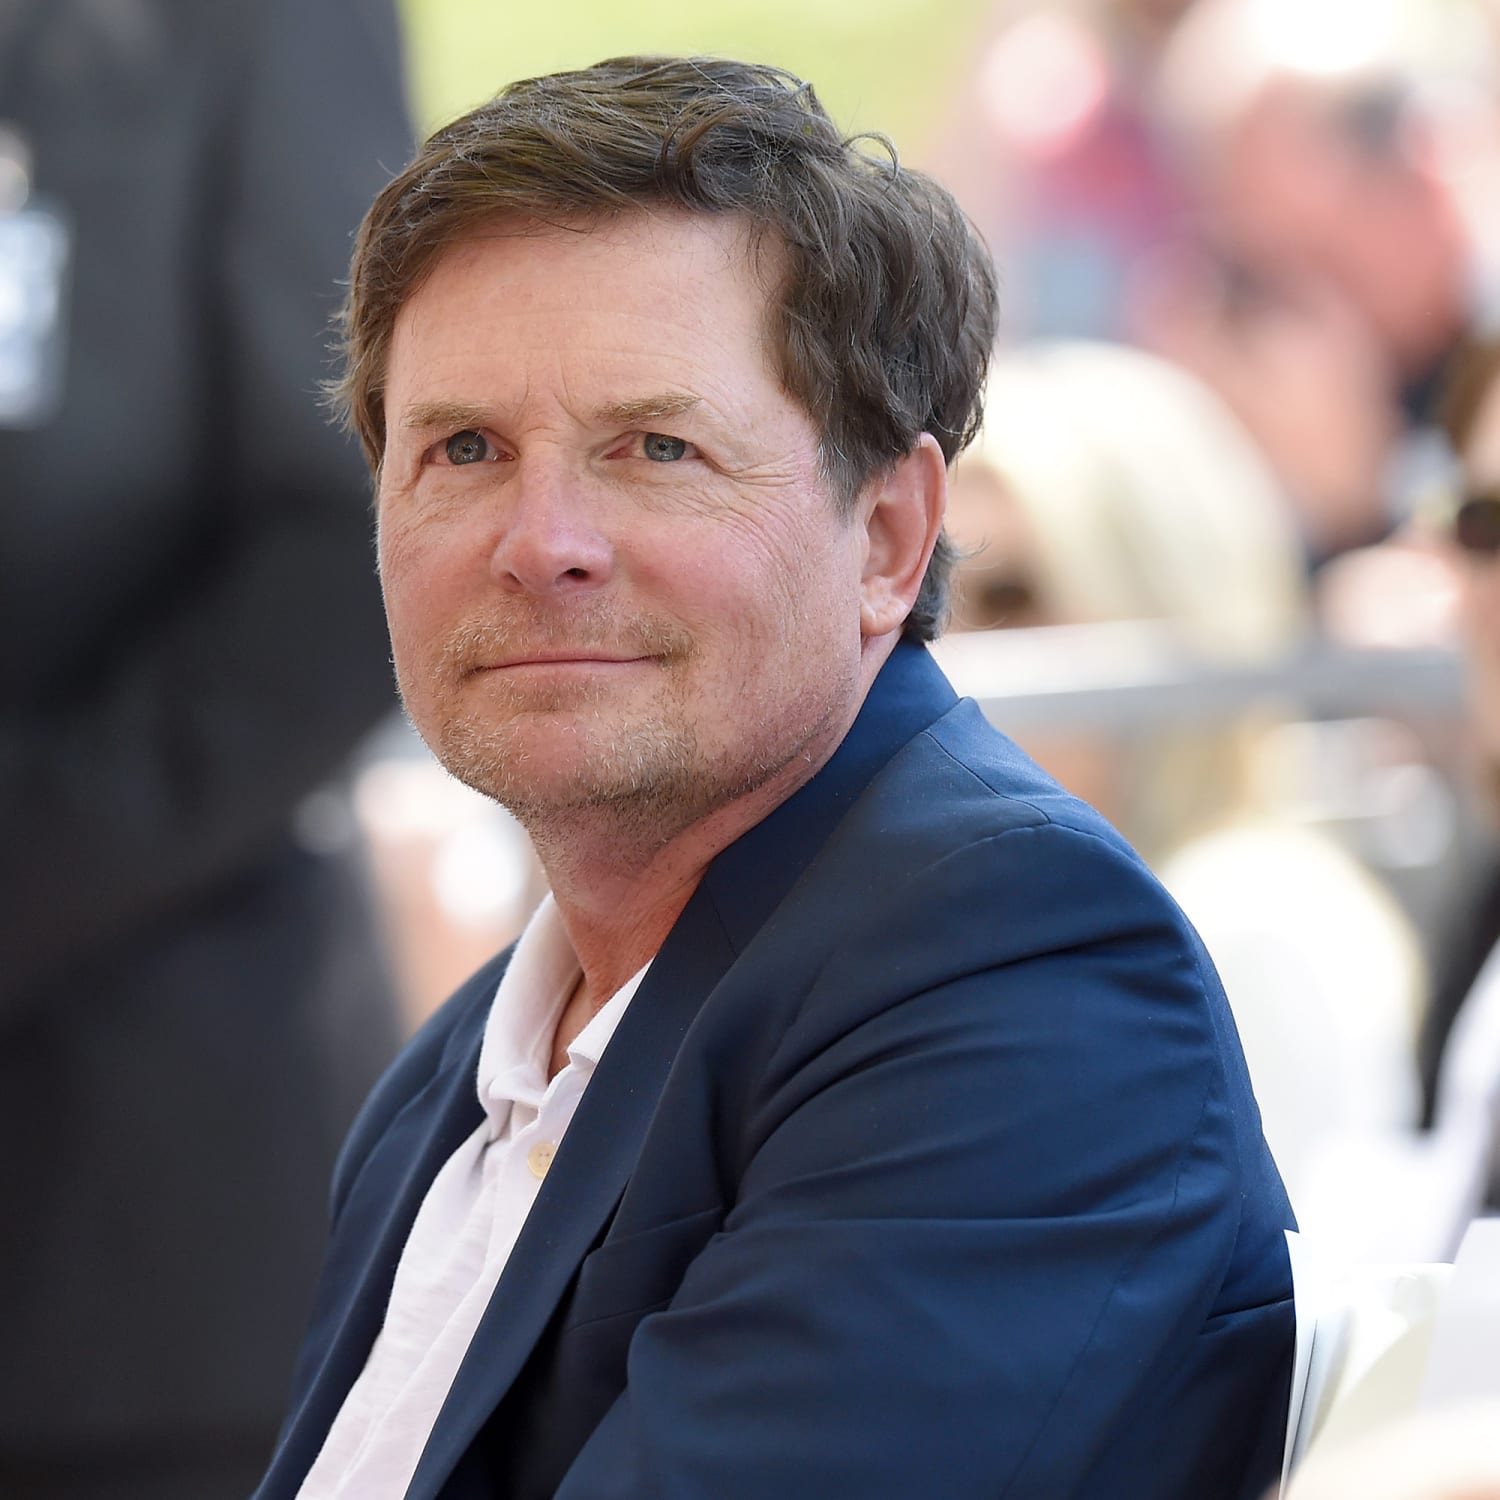 Michael J Fox Recalls His Darkest Moment It Was When I Questioned Everything